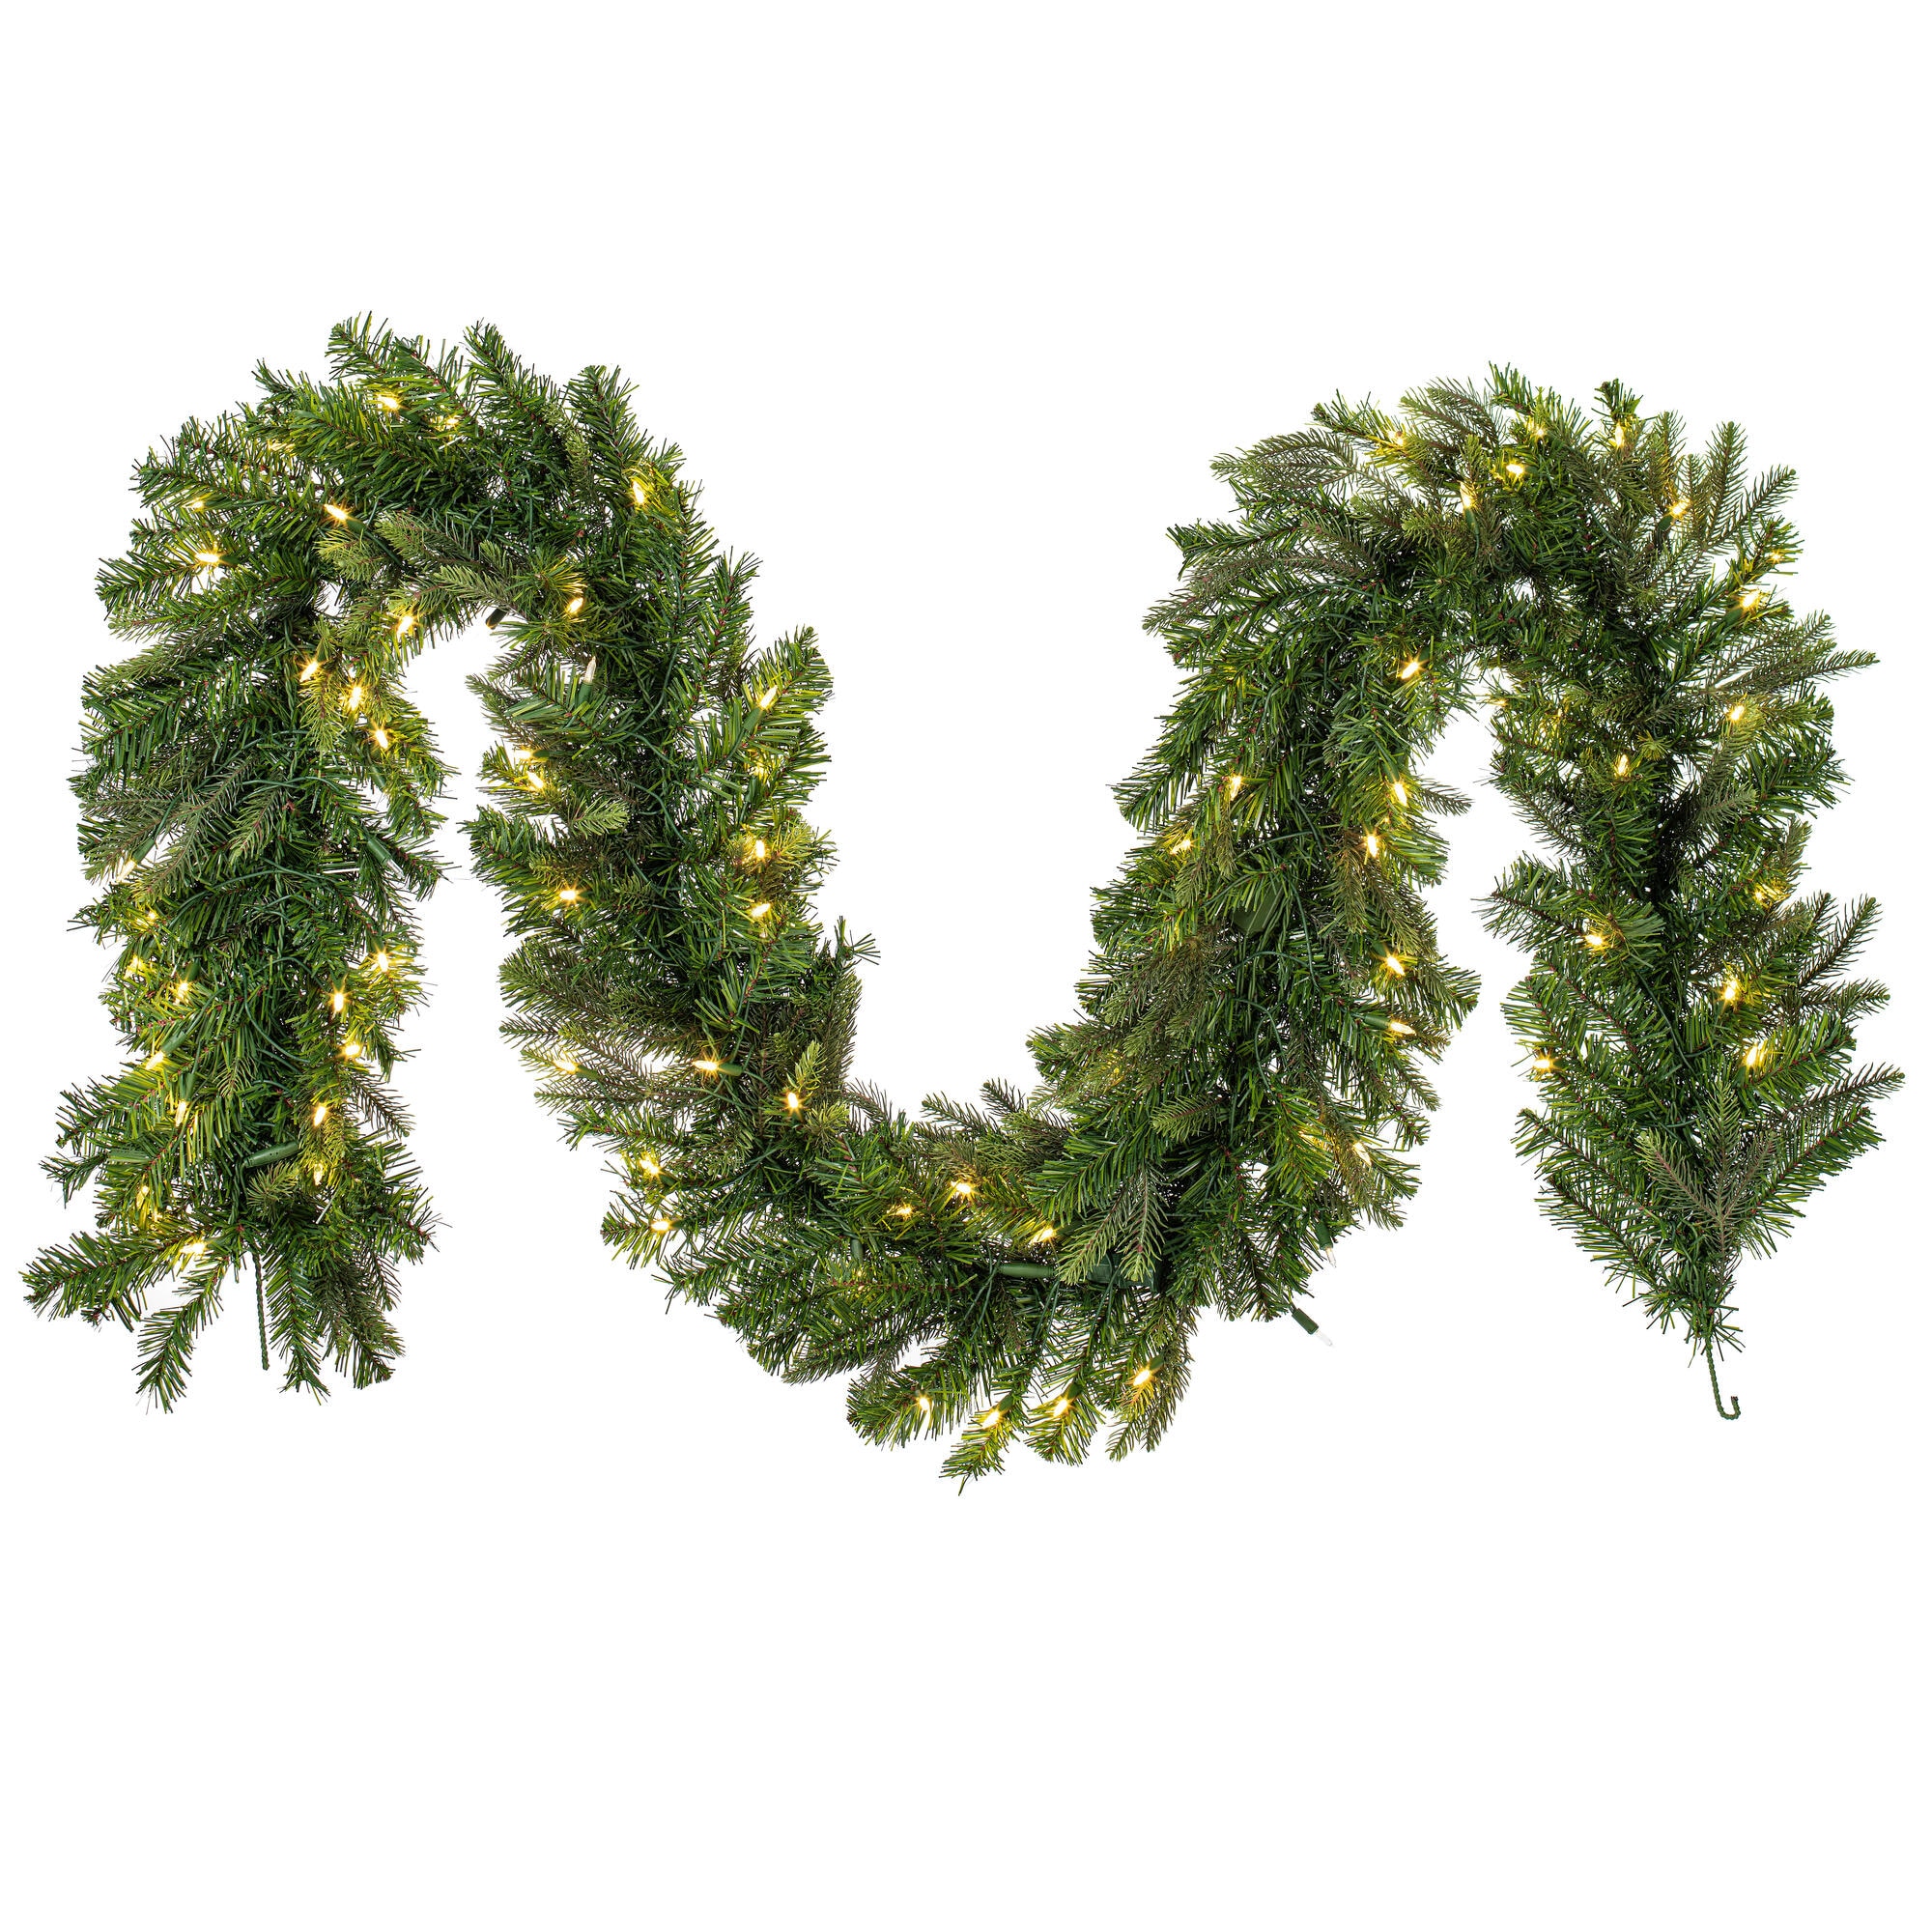 59 Feet Red Pip Berry Garland for Christmas Indoor Outdoor